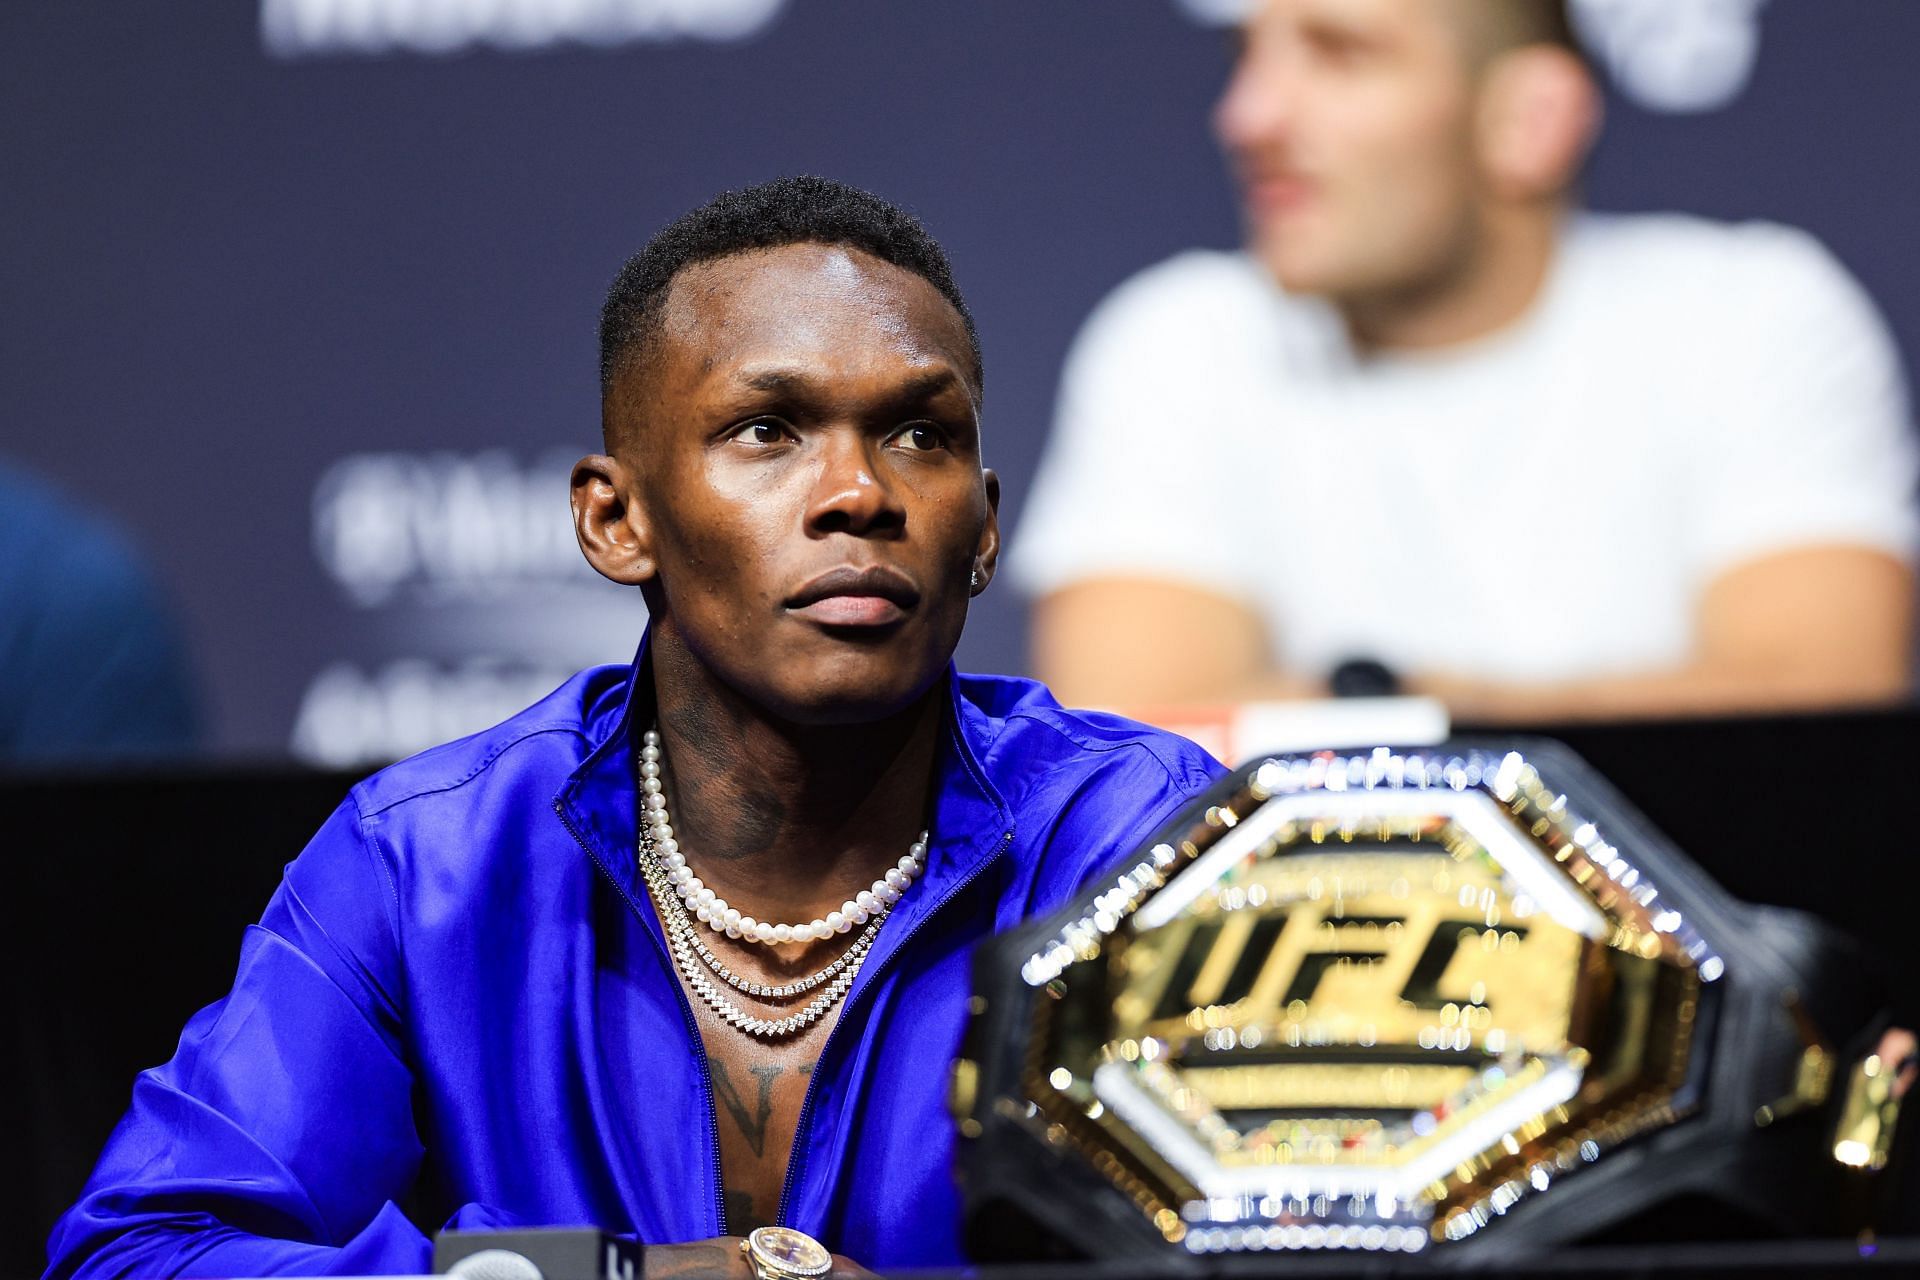 Israel Adesanya could yet surpass Anderson Silva as the middleweight GOAT